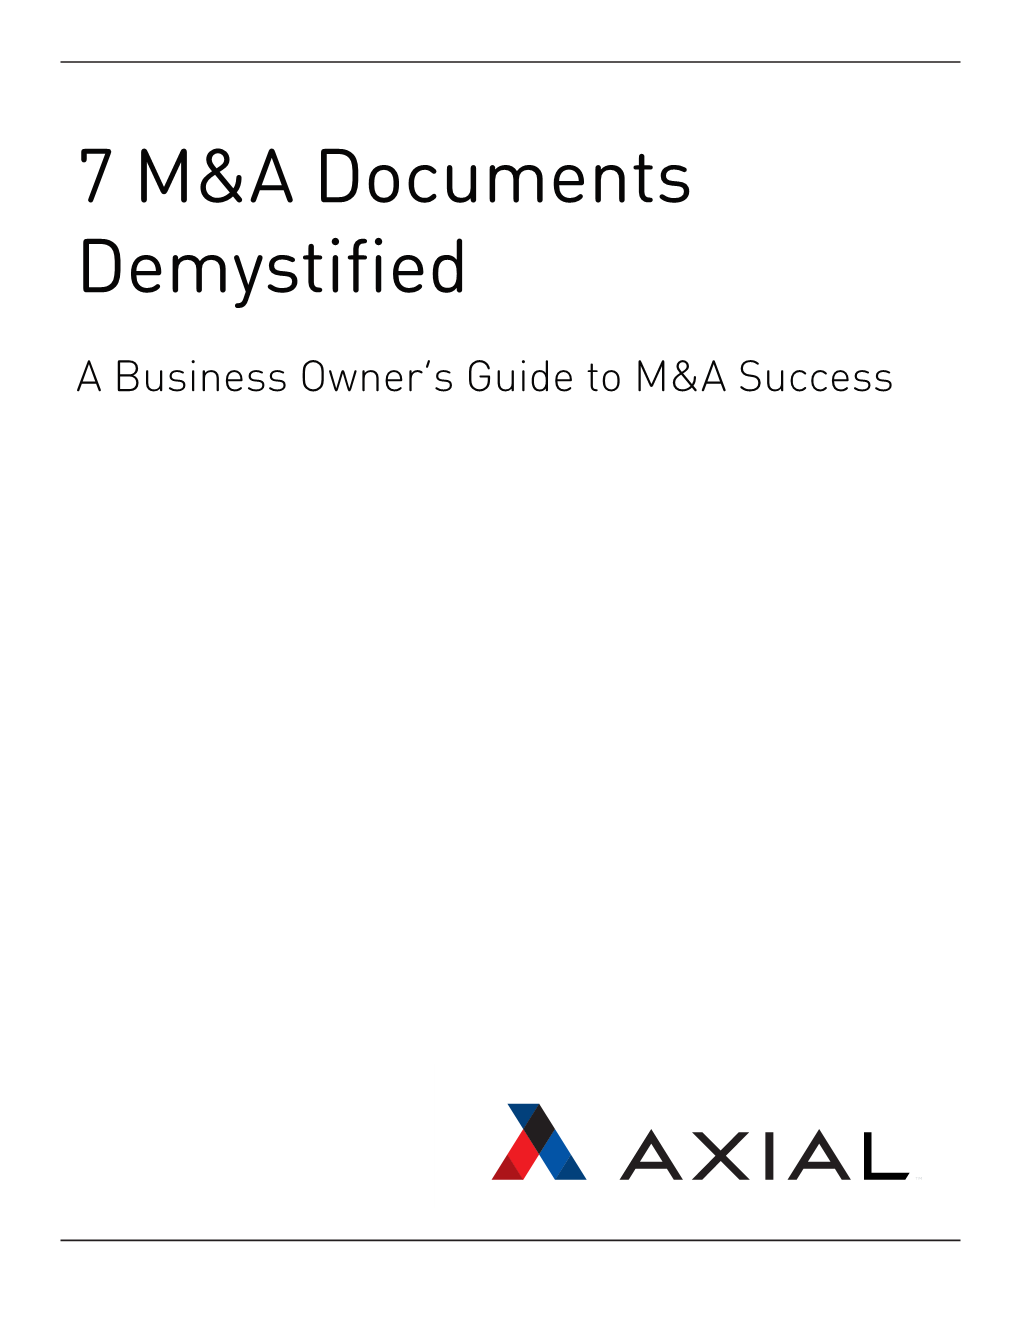 M&A Documents Demystified